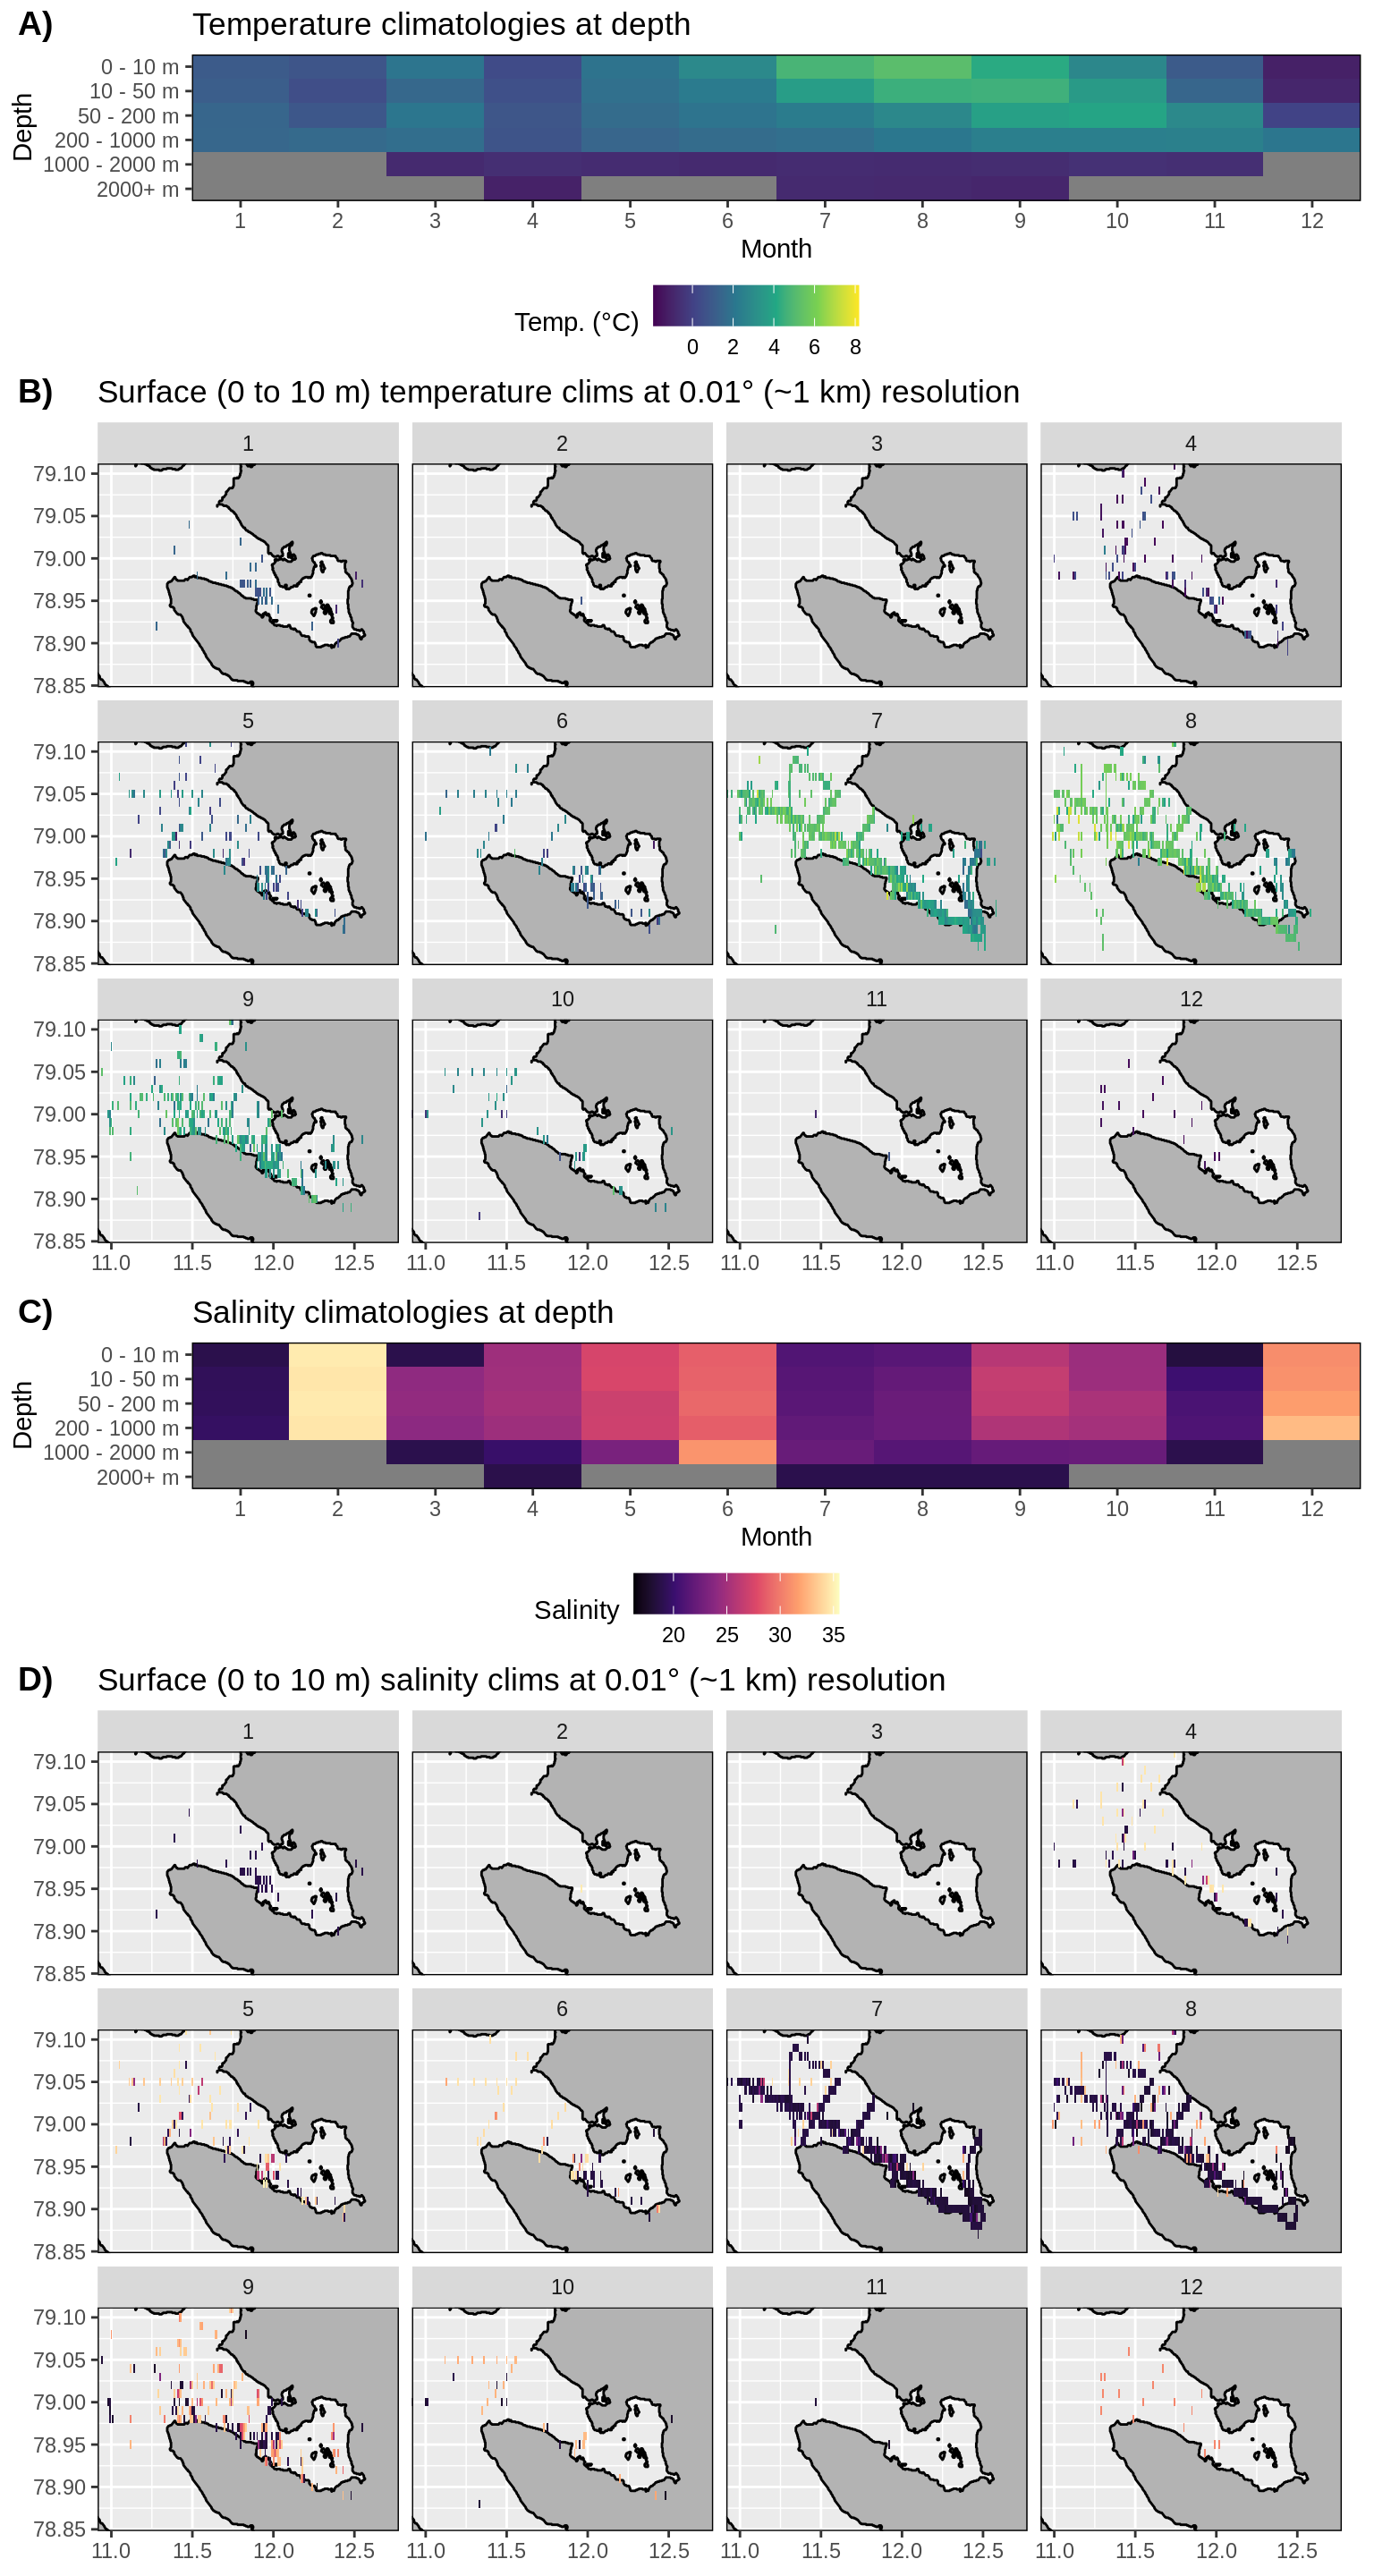 __Figure 2:__ Monthly climatologies for data at Kongsfjorden. The entire range of data was used for the climatology period. A) Temperature climatolgies at depths for all of Kongsfjorden. B) Spatial surface (0 to 10 m) temperature climatologies. C) Salinity climatologies at depth for all of Kongsfjorden. Note the much higher salinity for February and how most of the values are much lower than would be assumed. Probably due to a different sort of salinity calculation being used. D) Spatial surface (0 to 10 m) salinity climatologies.